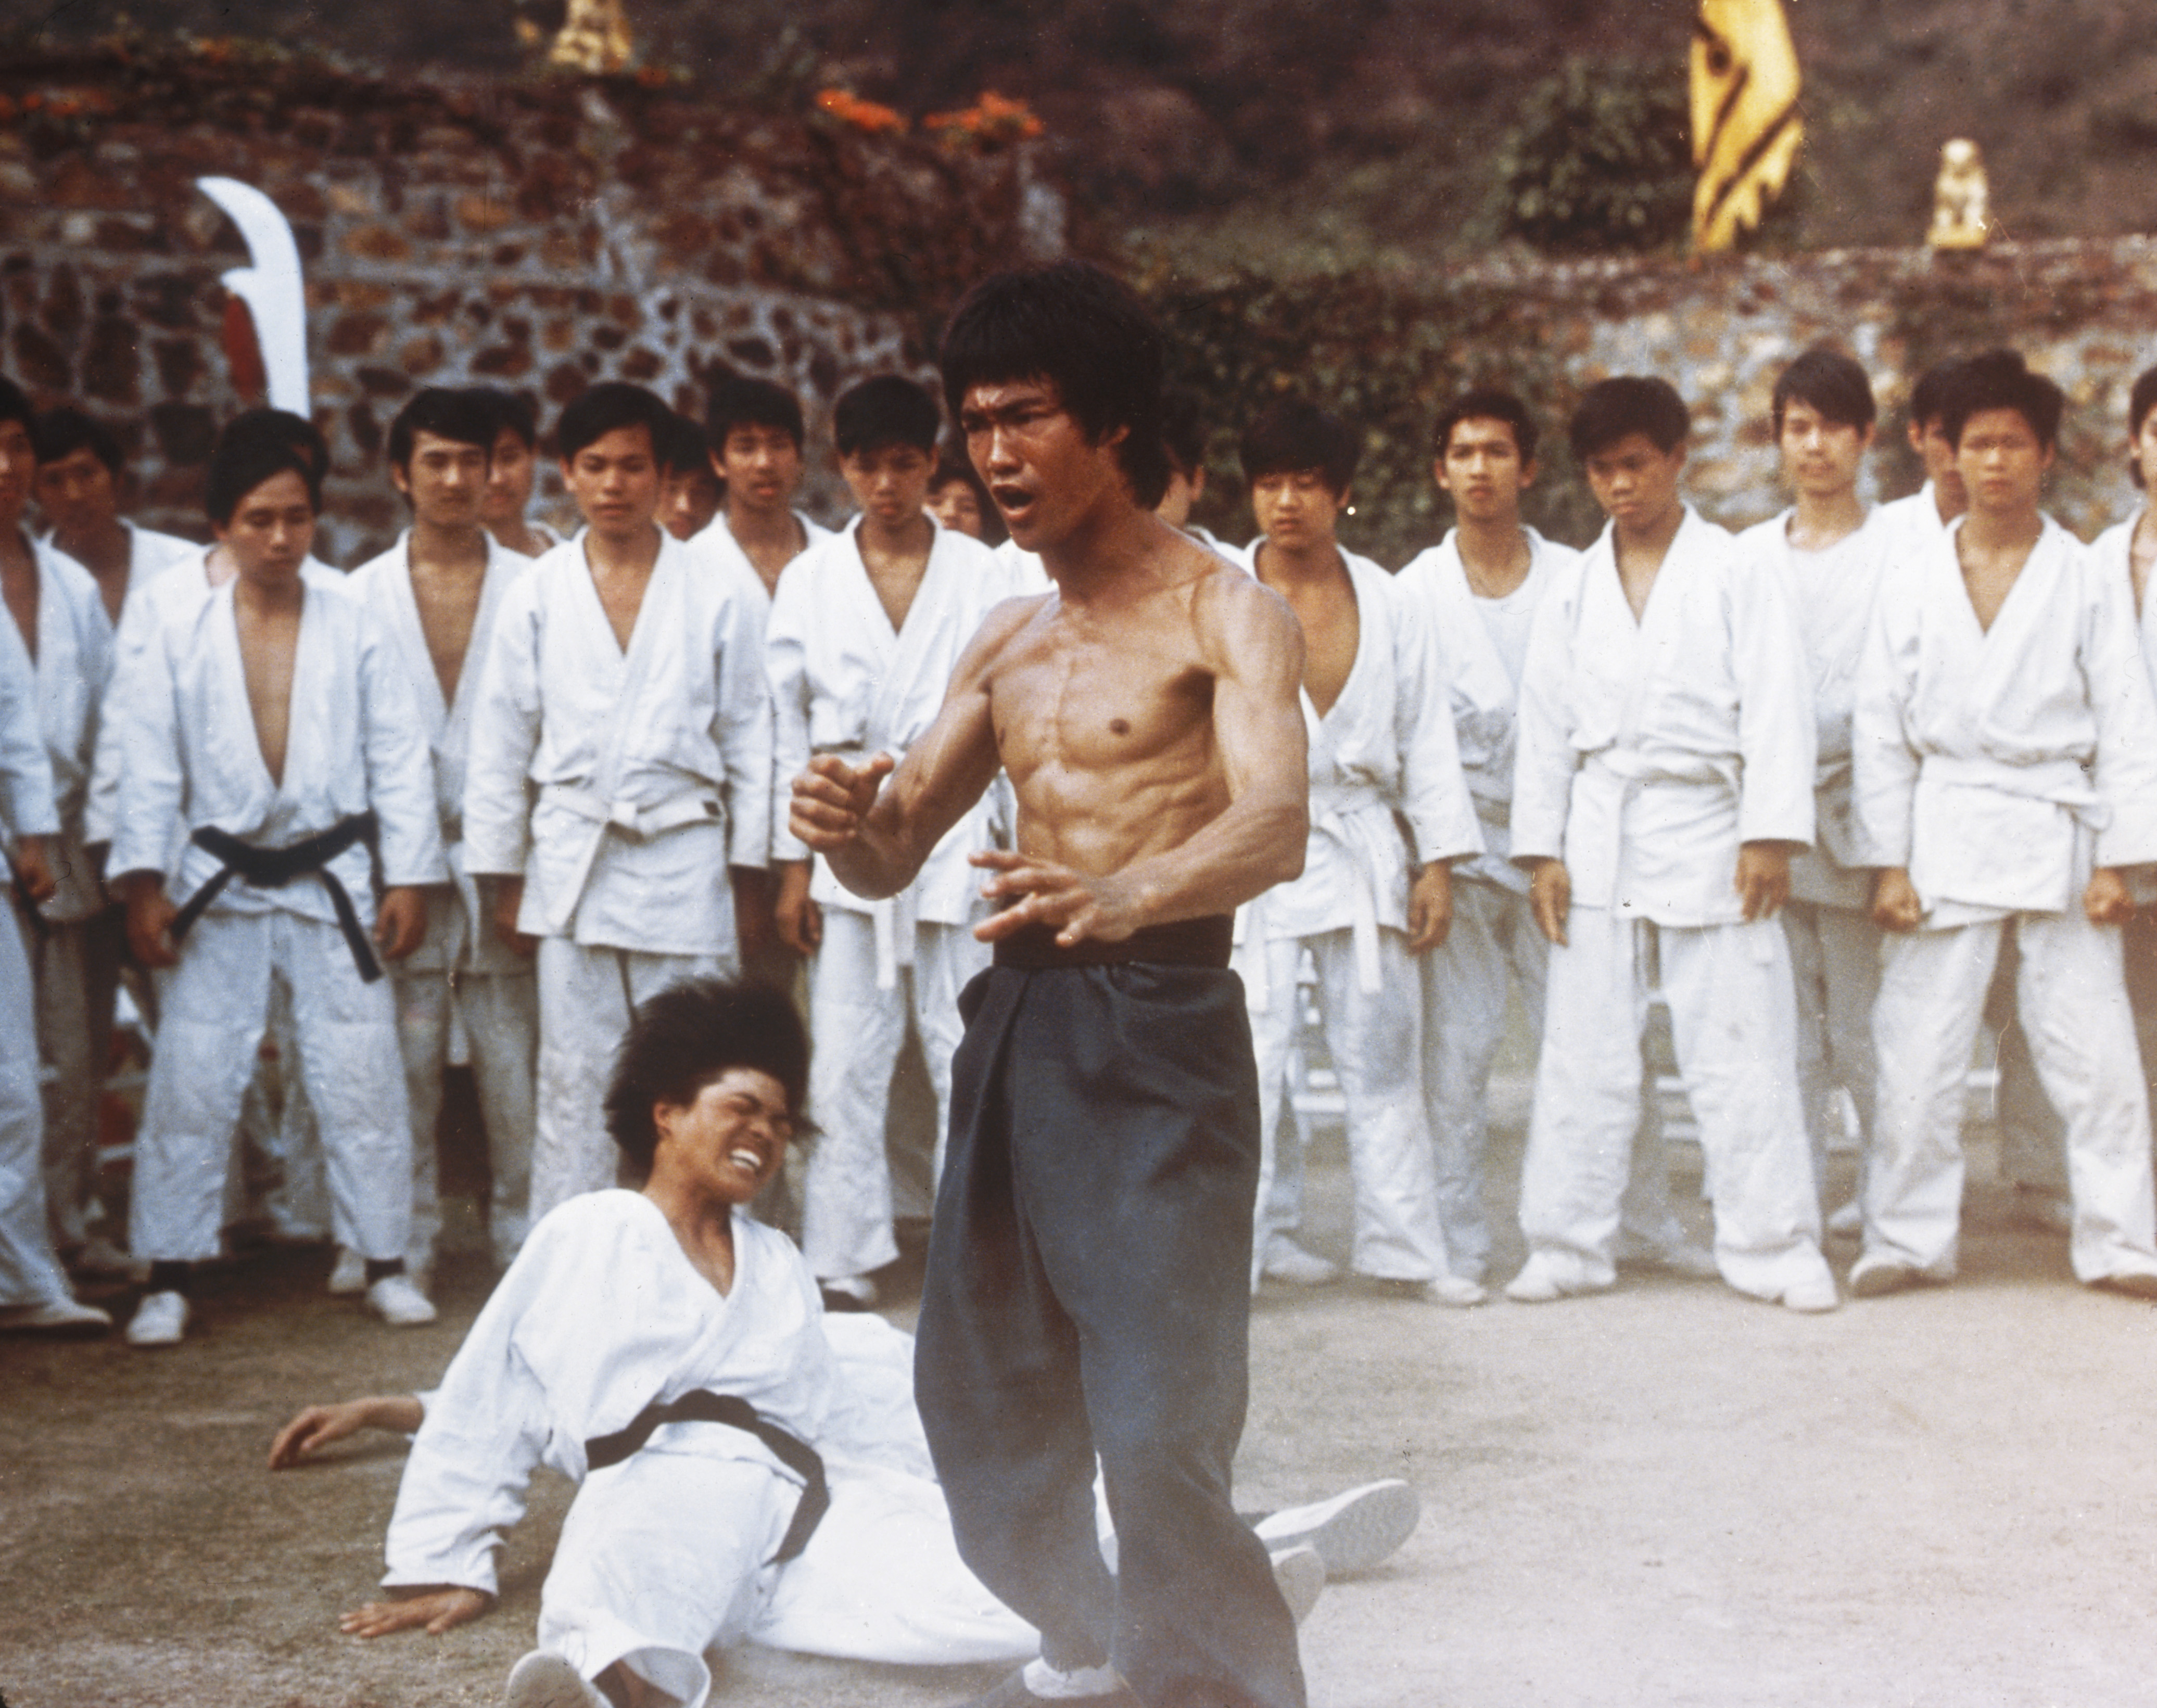 Chinese-American martial arts exponent Bruce Lee (1940 - 1973), in a still from the film 'Enter The Dragon', directed by Robert Crouse for Warner Brothers, 1973.